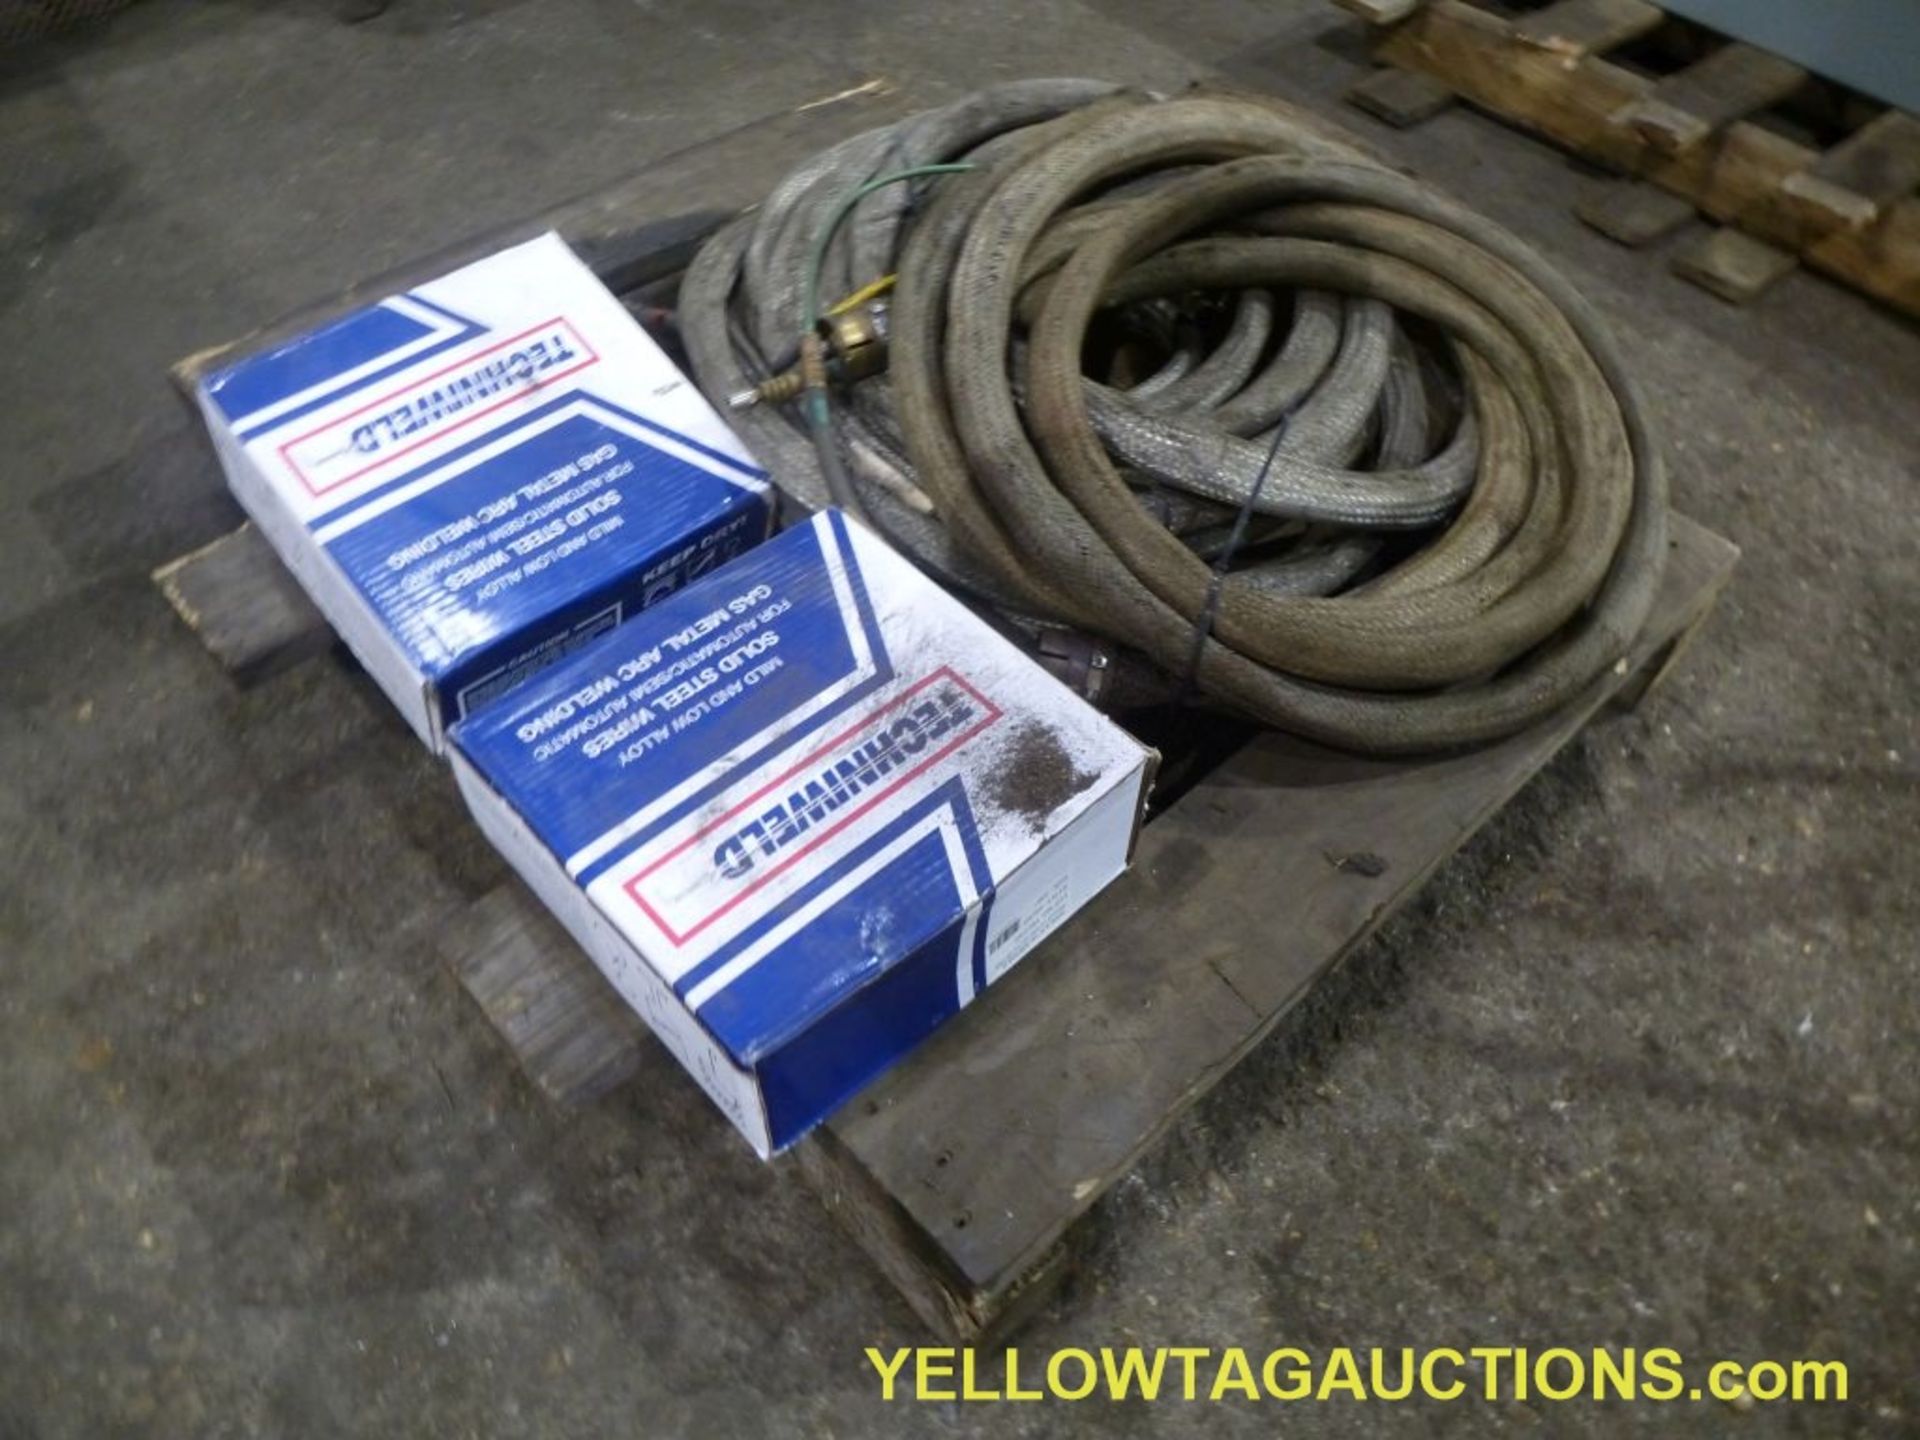 Lot of Assorted Wire and Hose|(2) Boxes of Solid Steel Wires, Gas Metal Arc Welding Wire, Size 0.